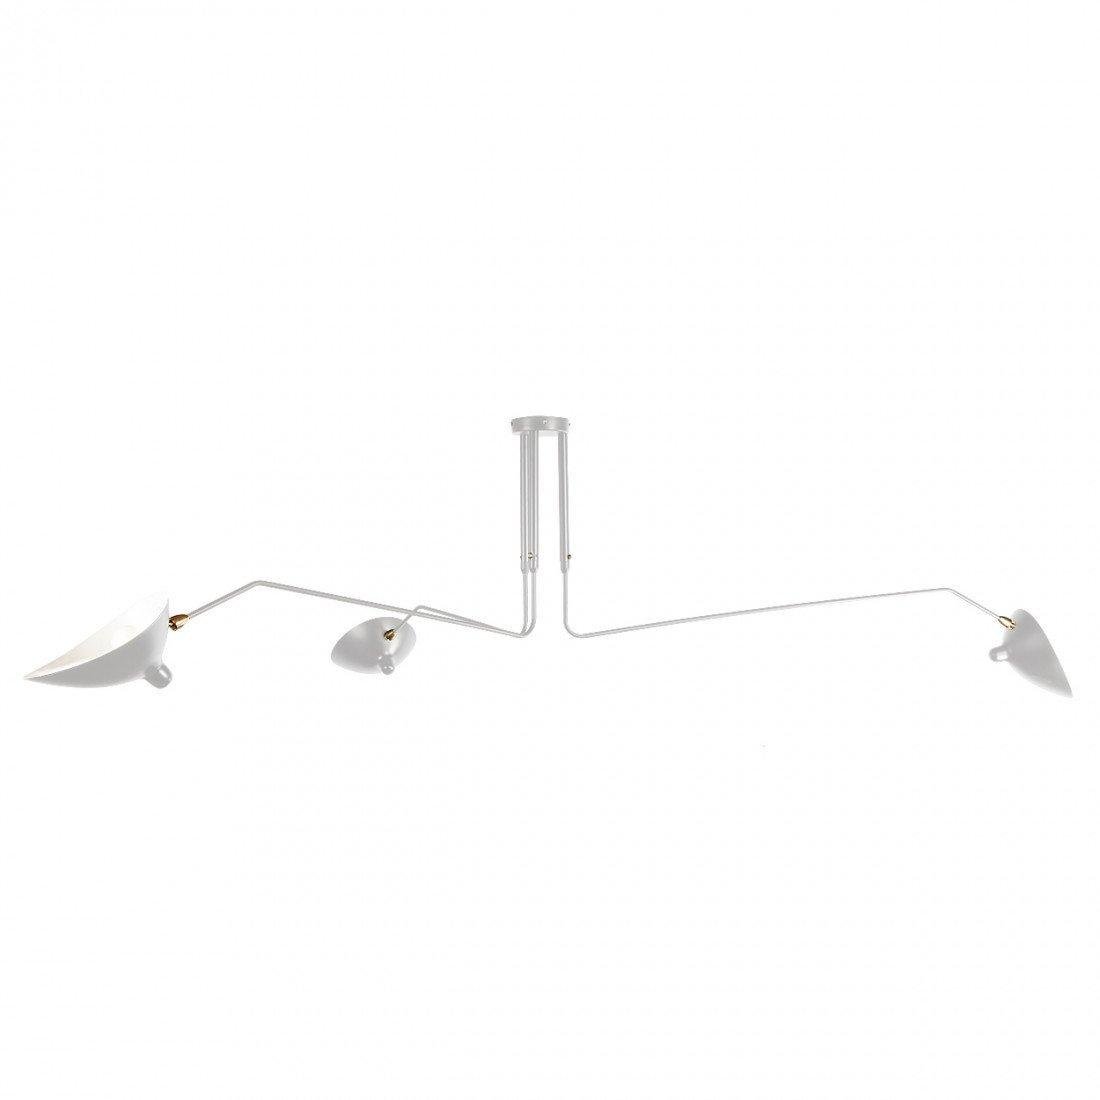 Serge Mouille Ceiling Light with 3 Heads in White, Size: L 59″ x H 12.6″ (L 150cm x H 32cm)